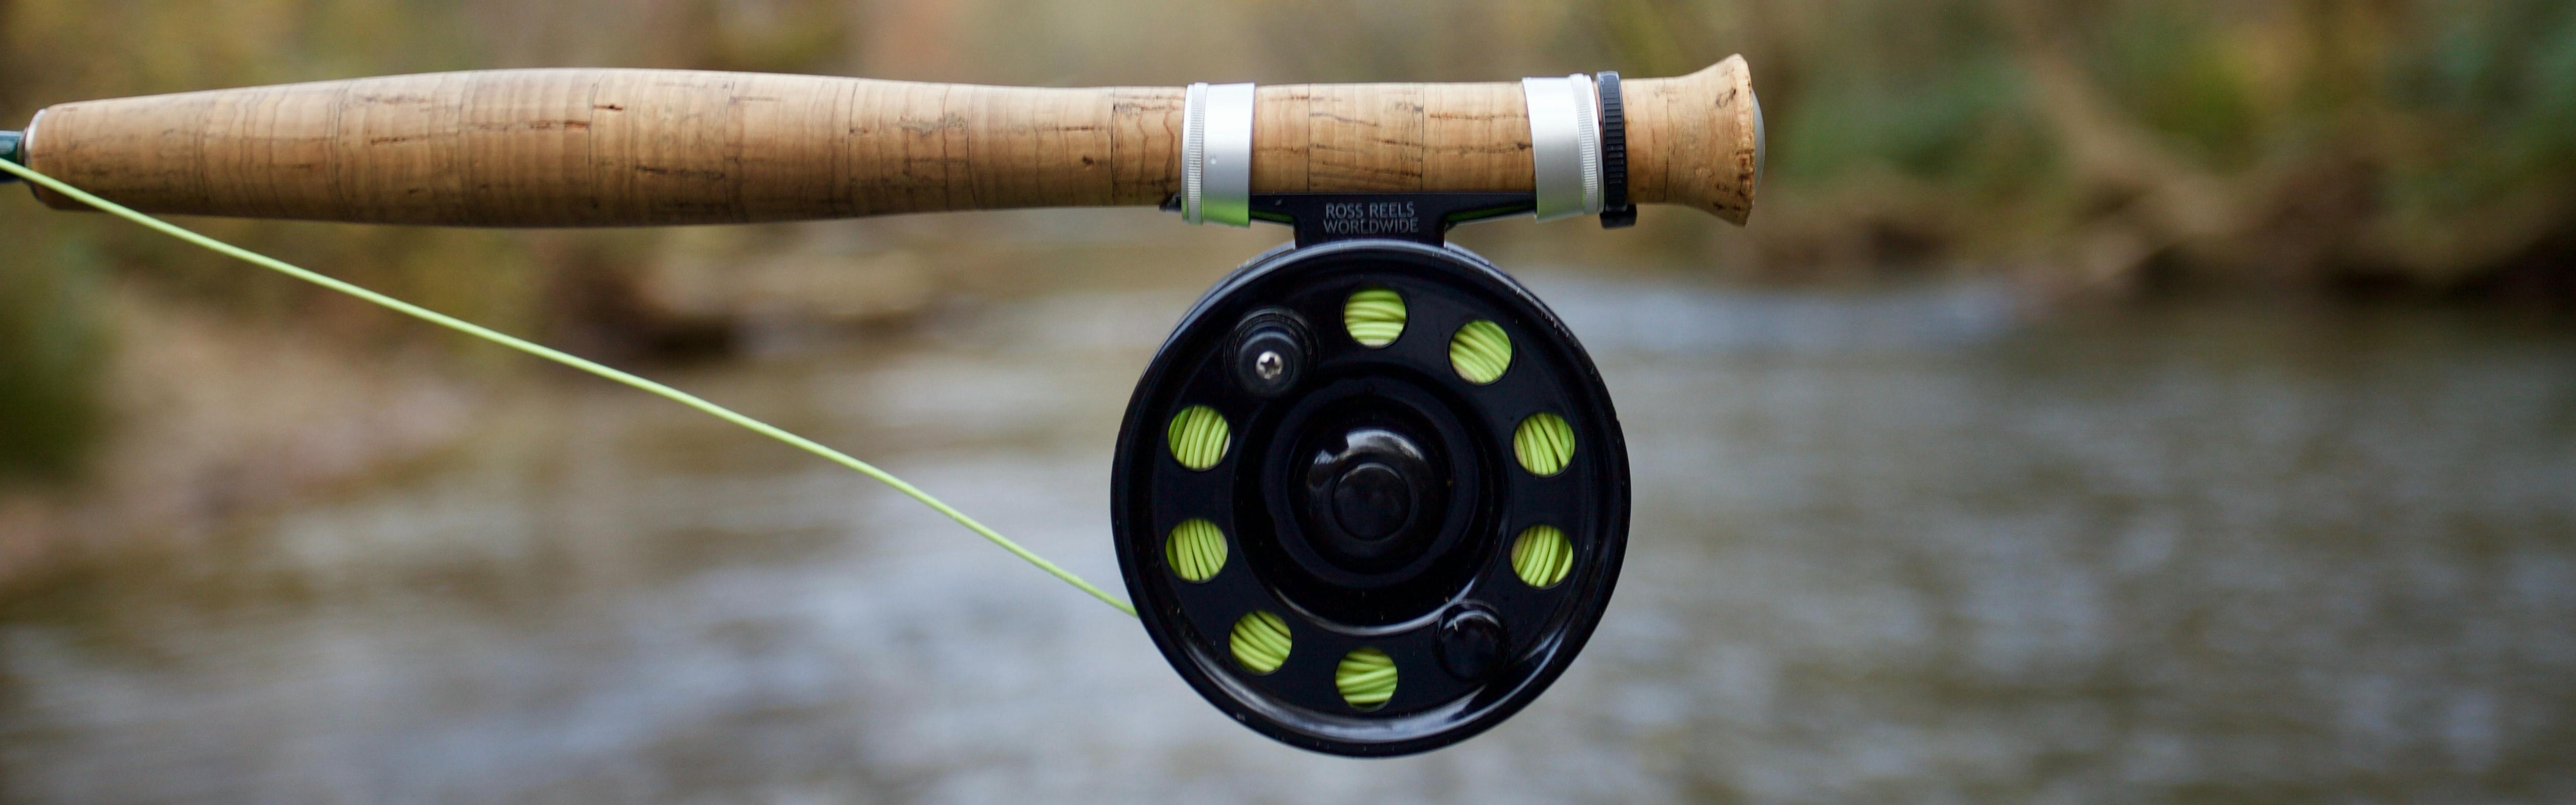 What Do You Get at Each Price Point for Fly Rods?